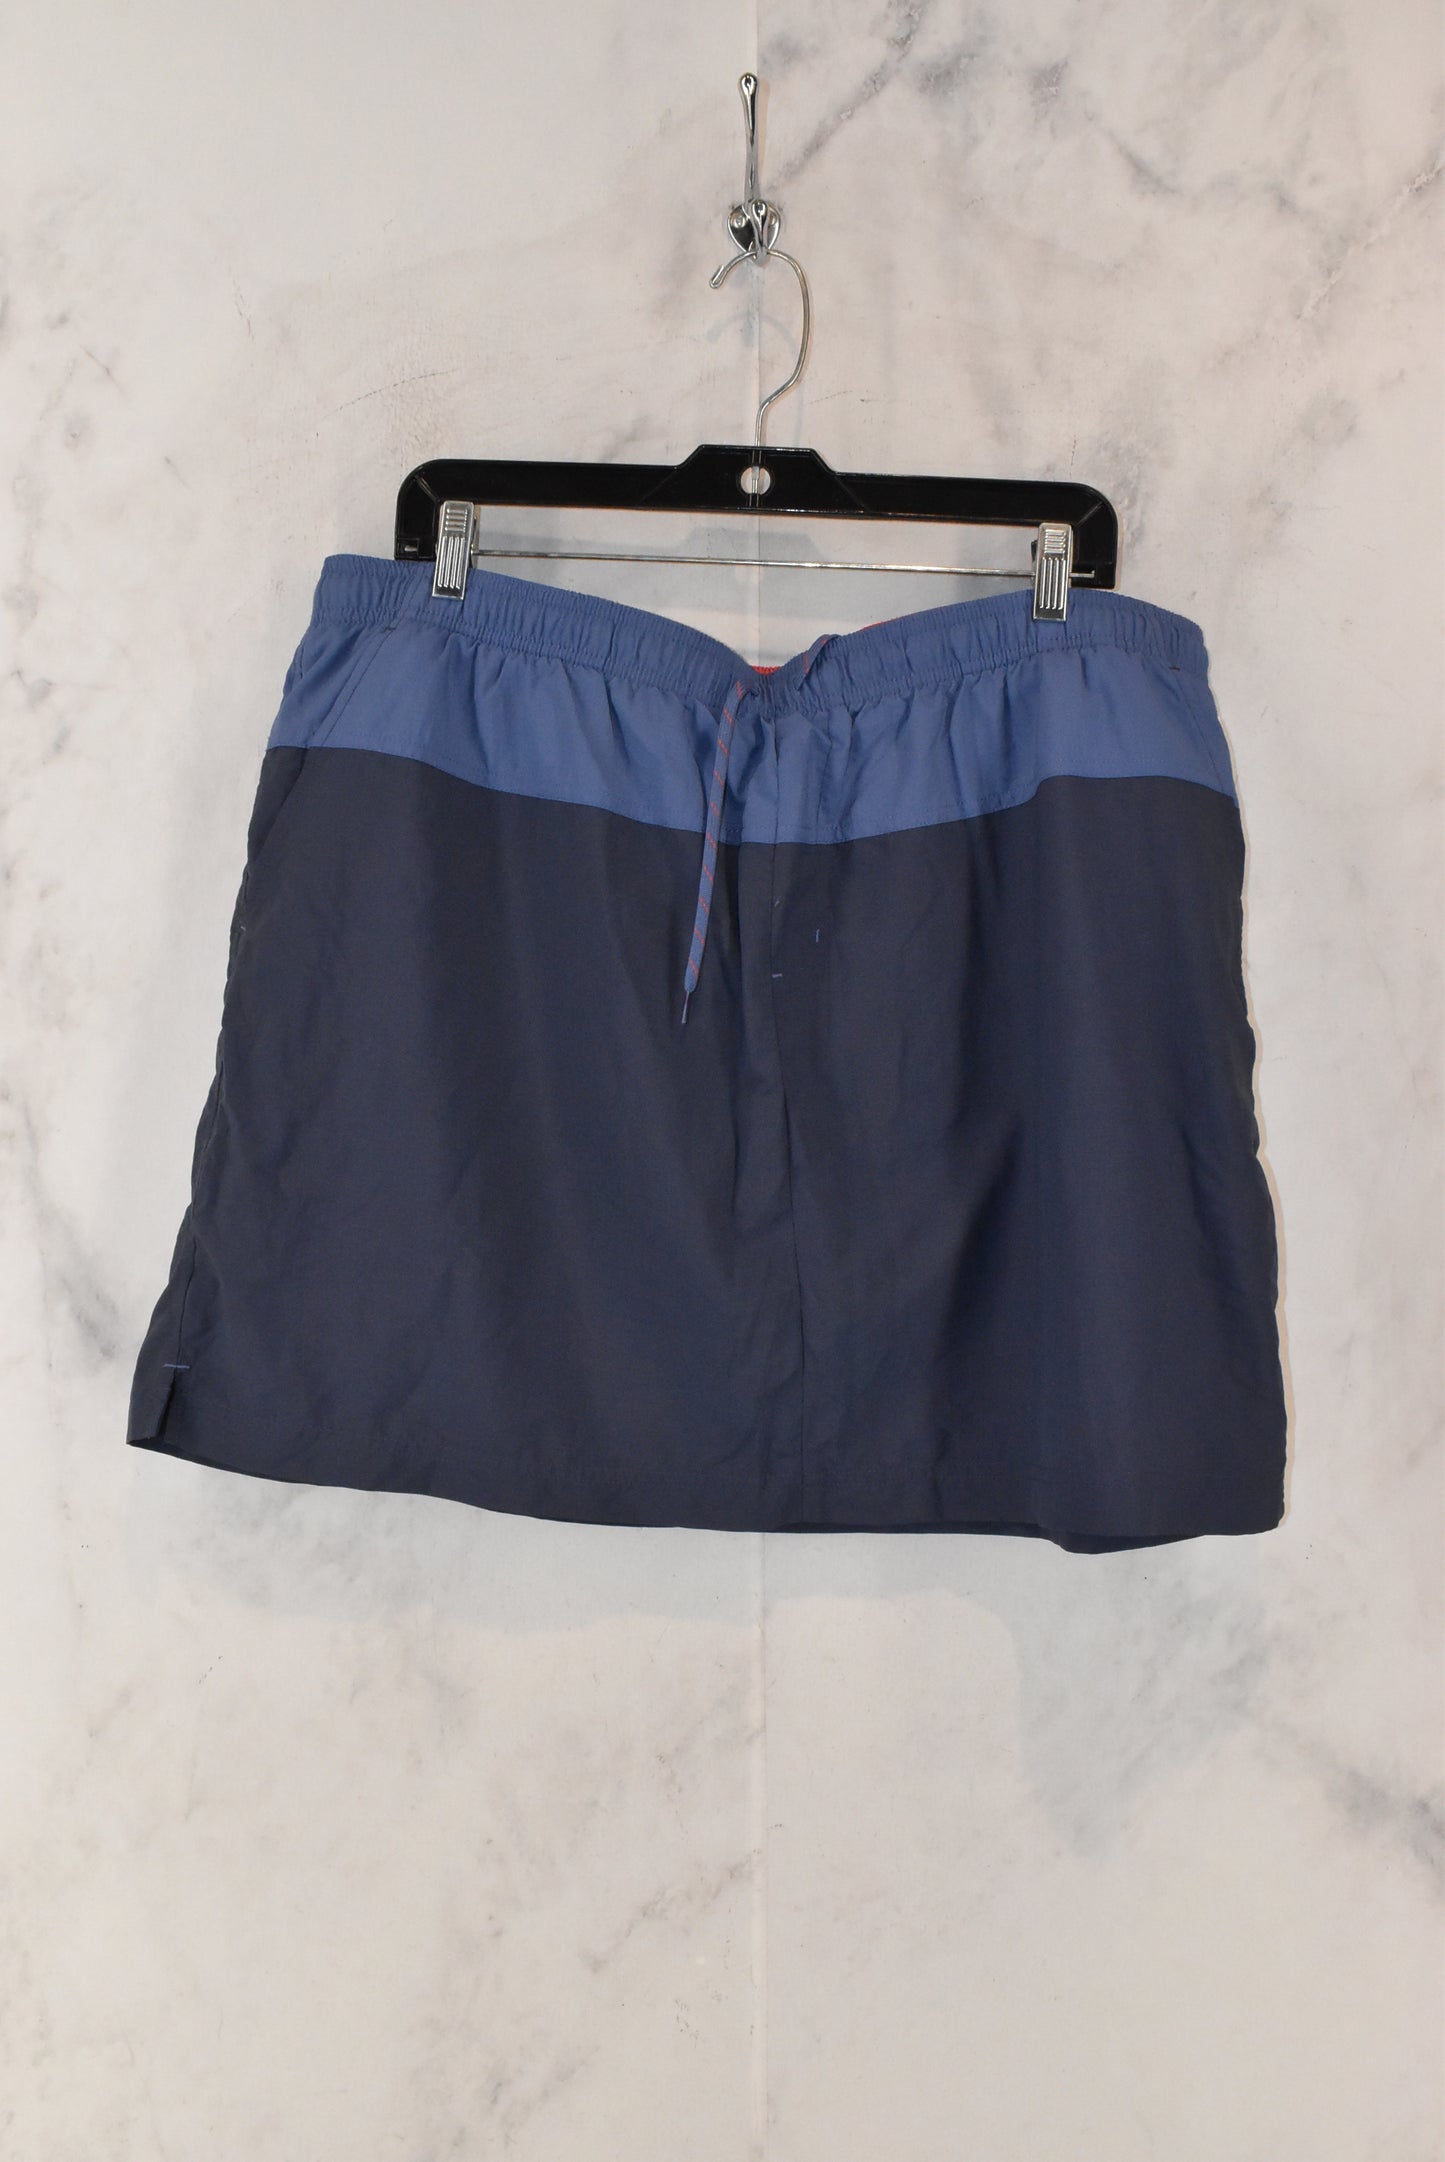 Athletic Skirt Skort By Columbia  Size: 1x